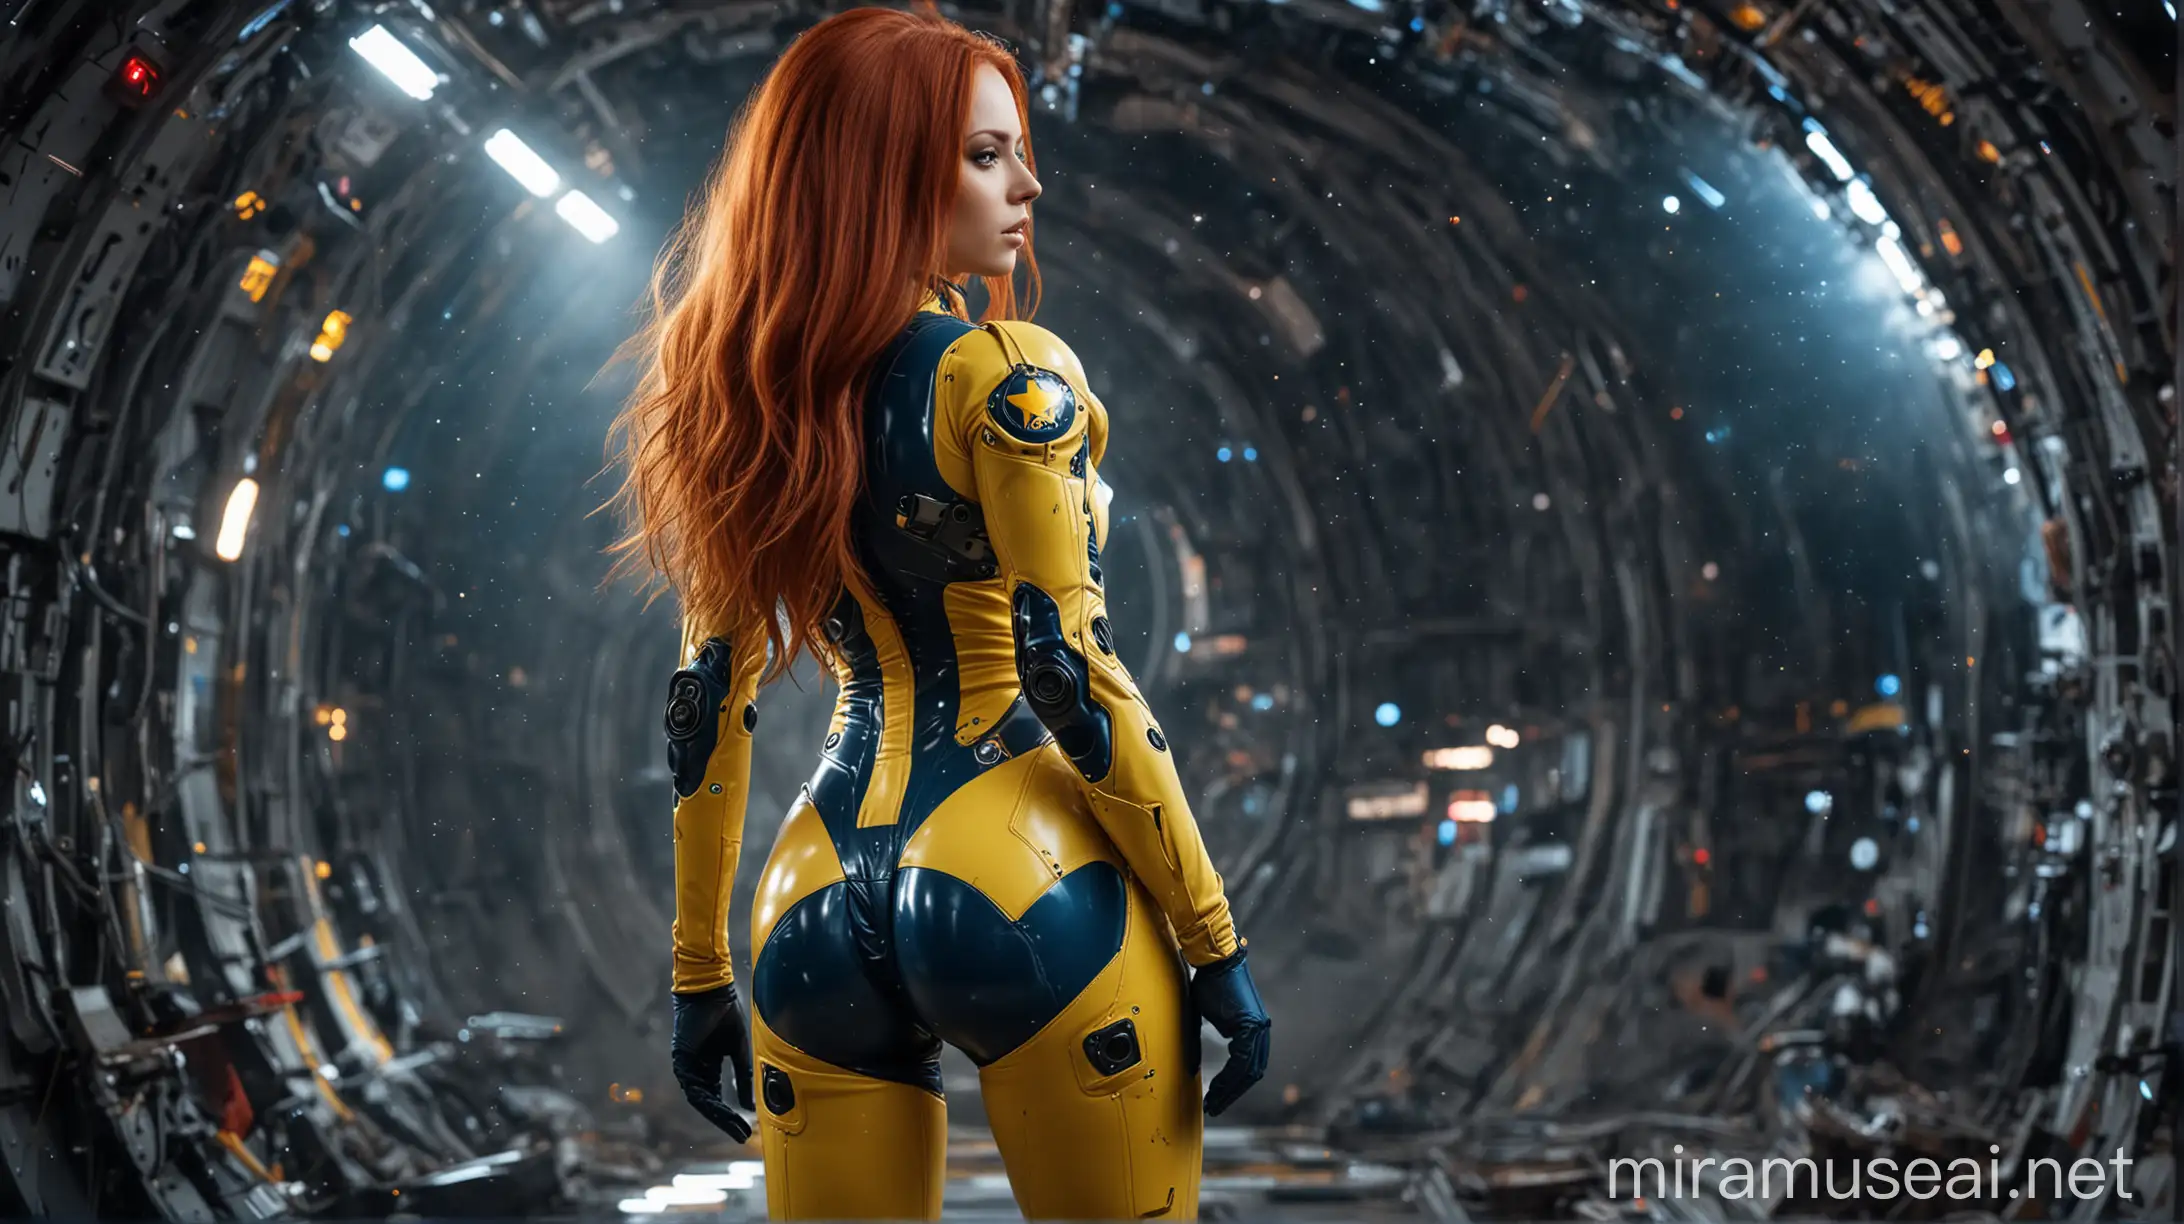 Futuristic Russian Fitness Model in Glowing Yellow and Blue Spacesuit on Alien Planet